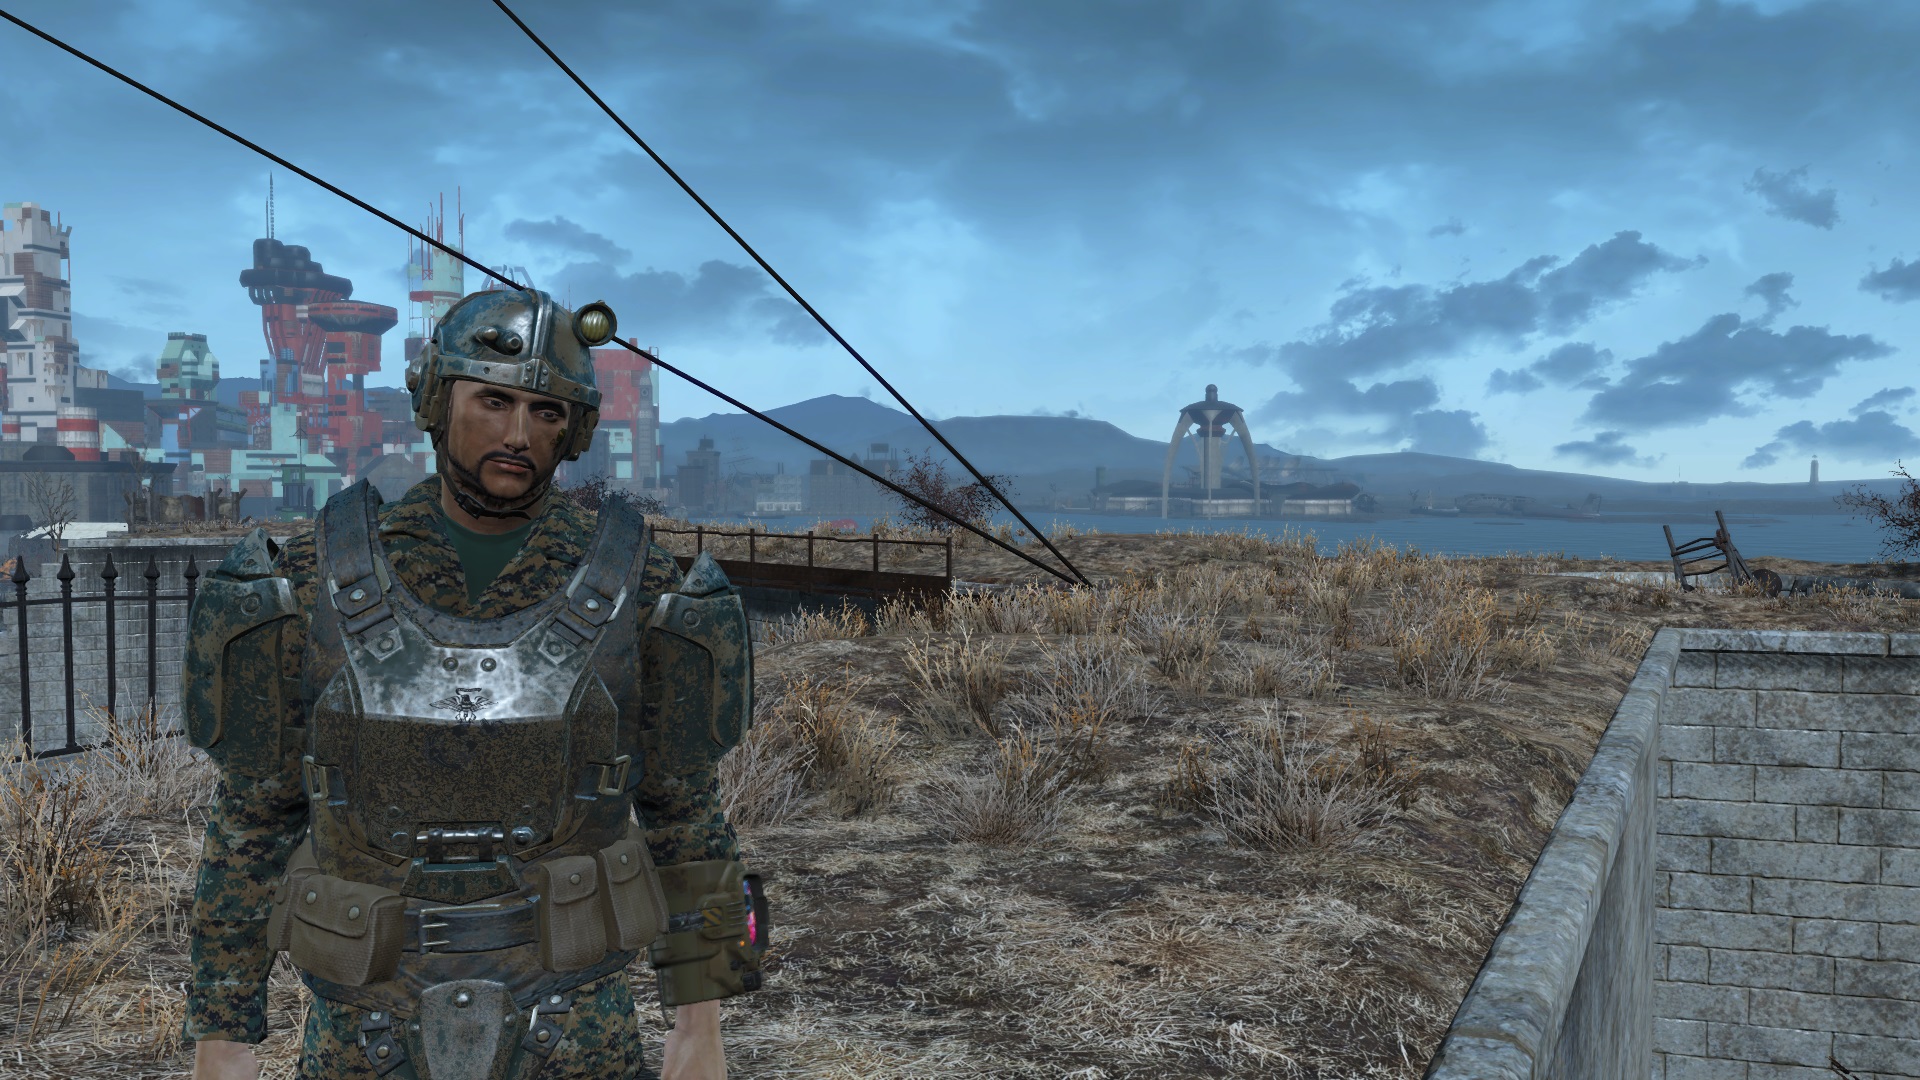 Https www fallout4 mods com. Фоллаут 4 Военная форма. Fallout 4 Military Armor. Фоллаут 4 одежда военного. Фоллаут 4 Military uniform.